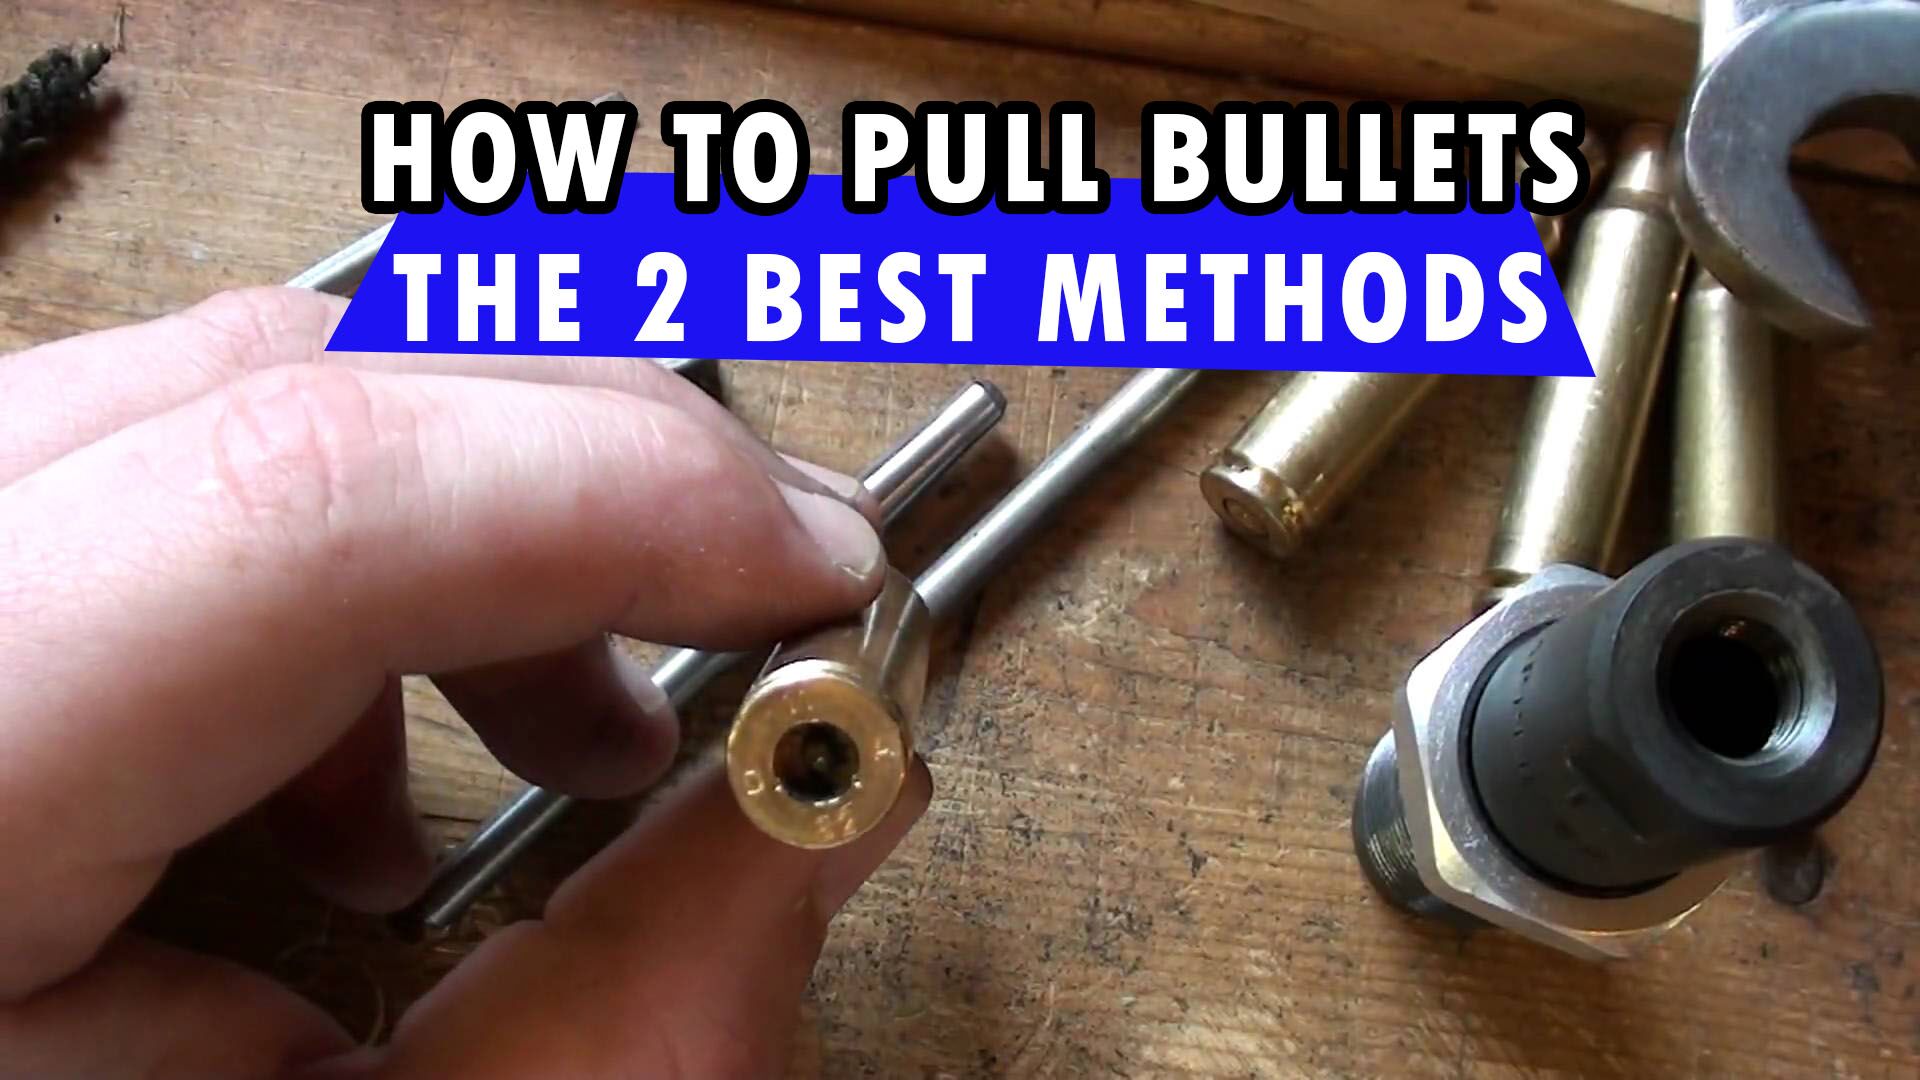 How to Pull Bullets The 2 Best Methods